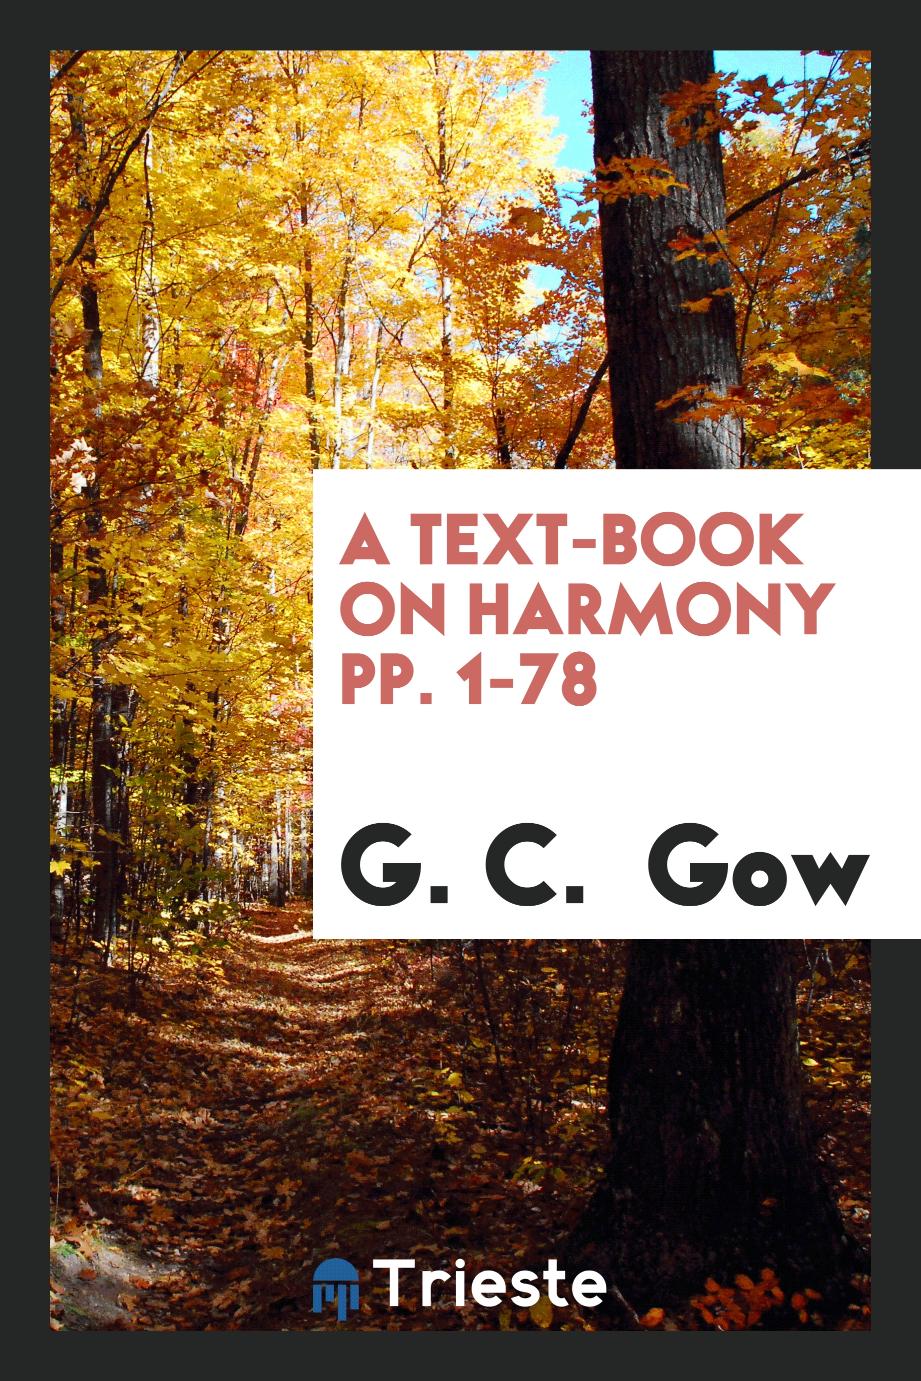 A Text-book on Harmony pp. 1-78